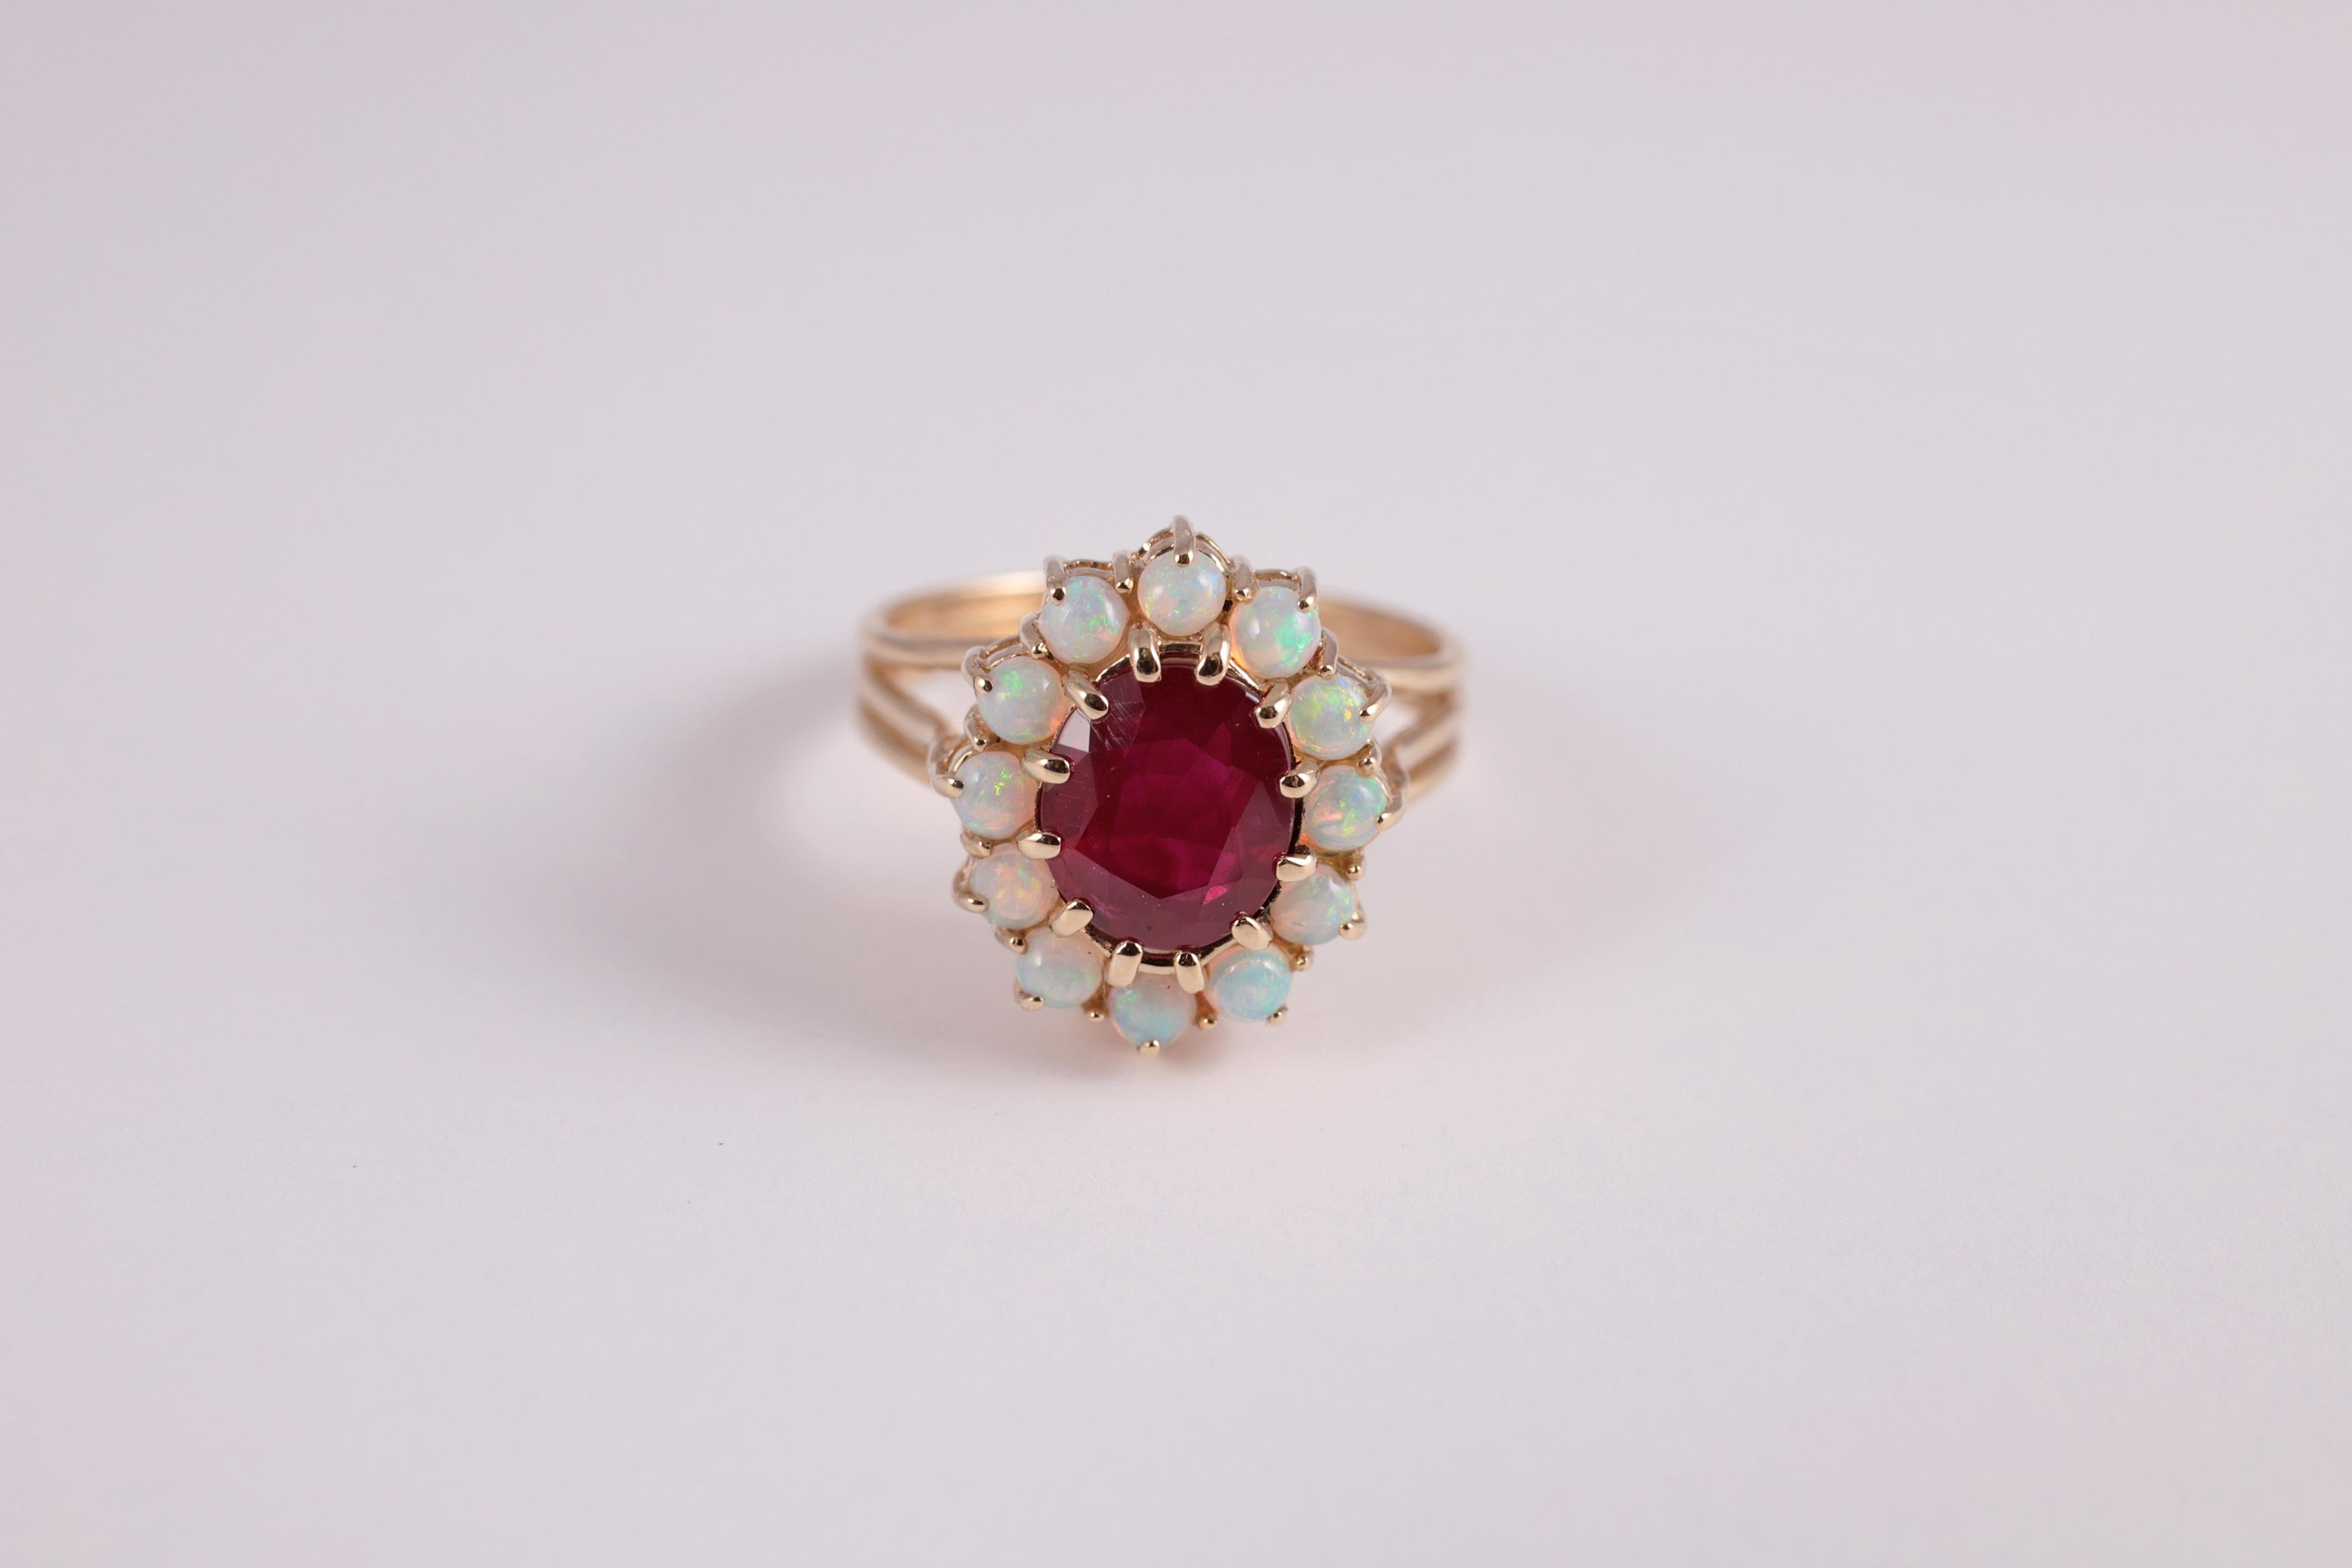 Oval Cut 2.23 Carat Untreated Natural Burma Ruby and Opal Ring